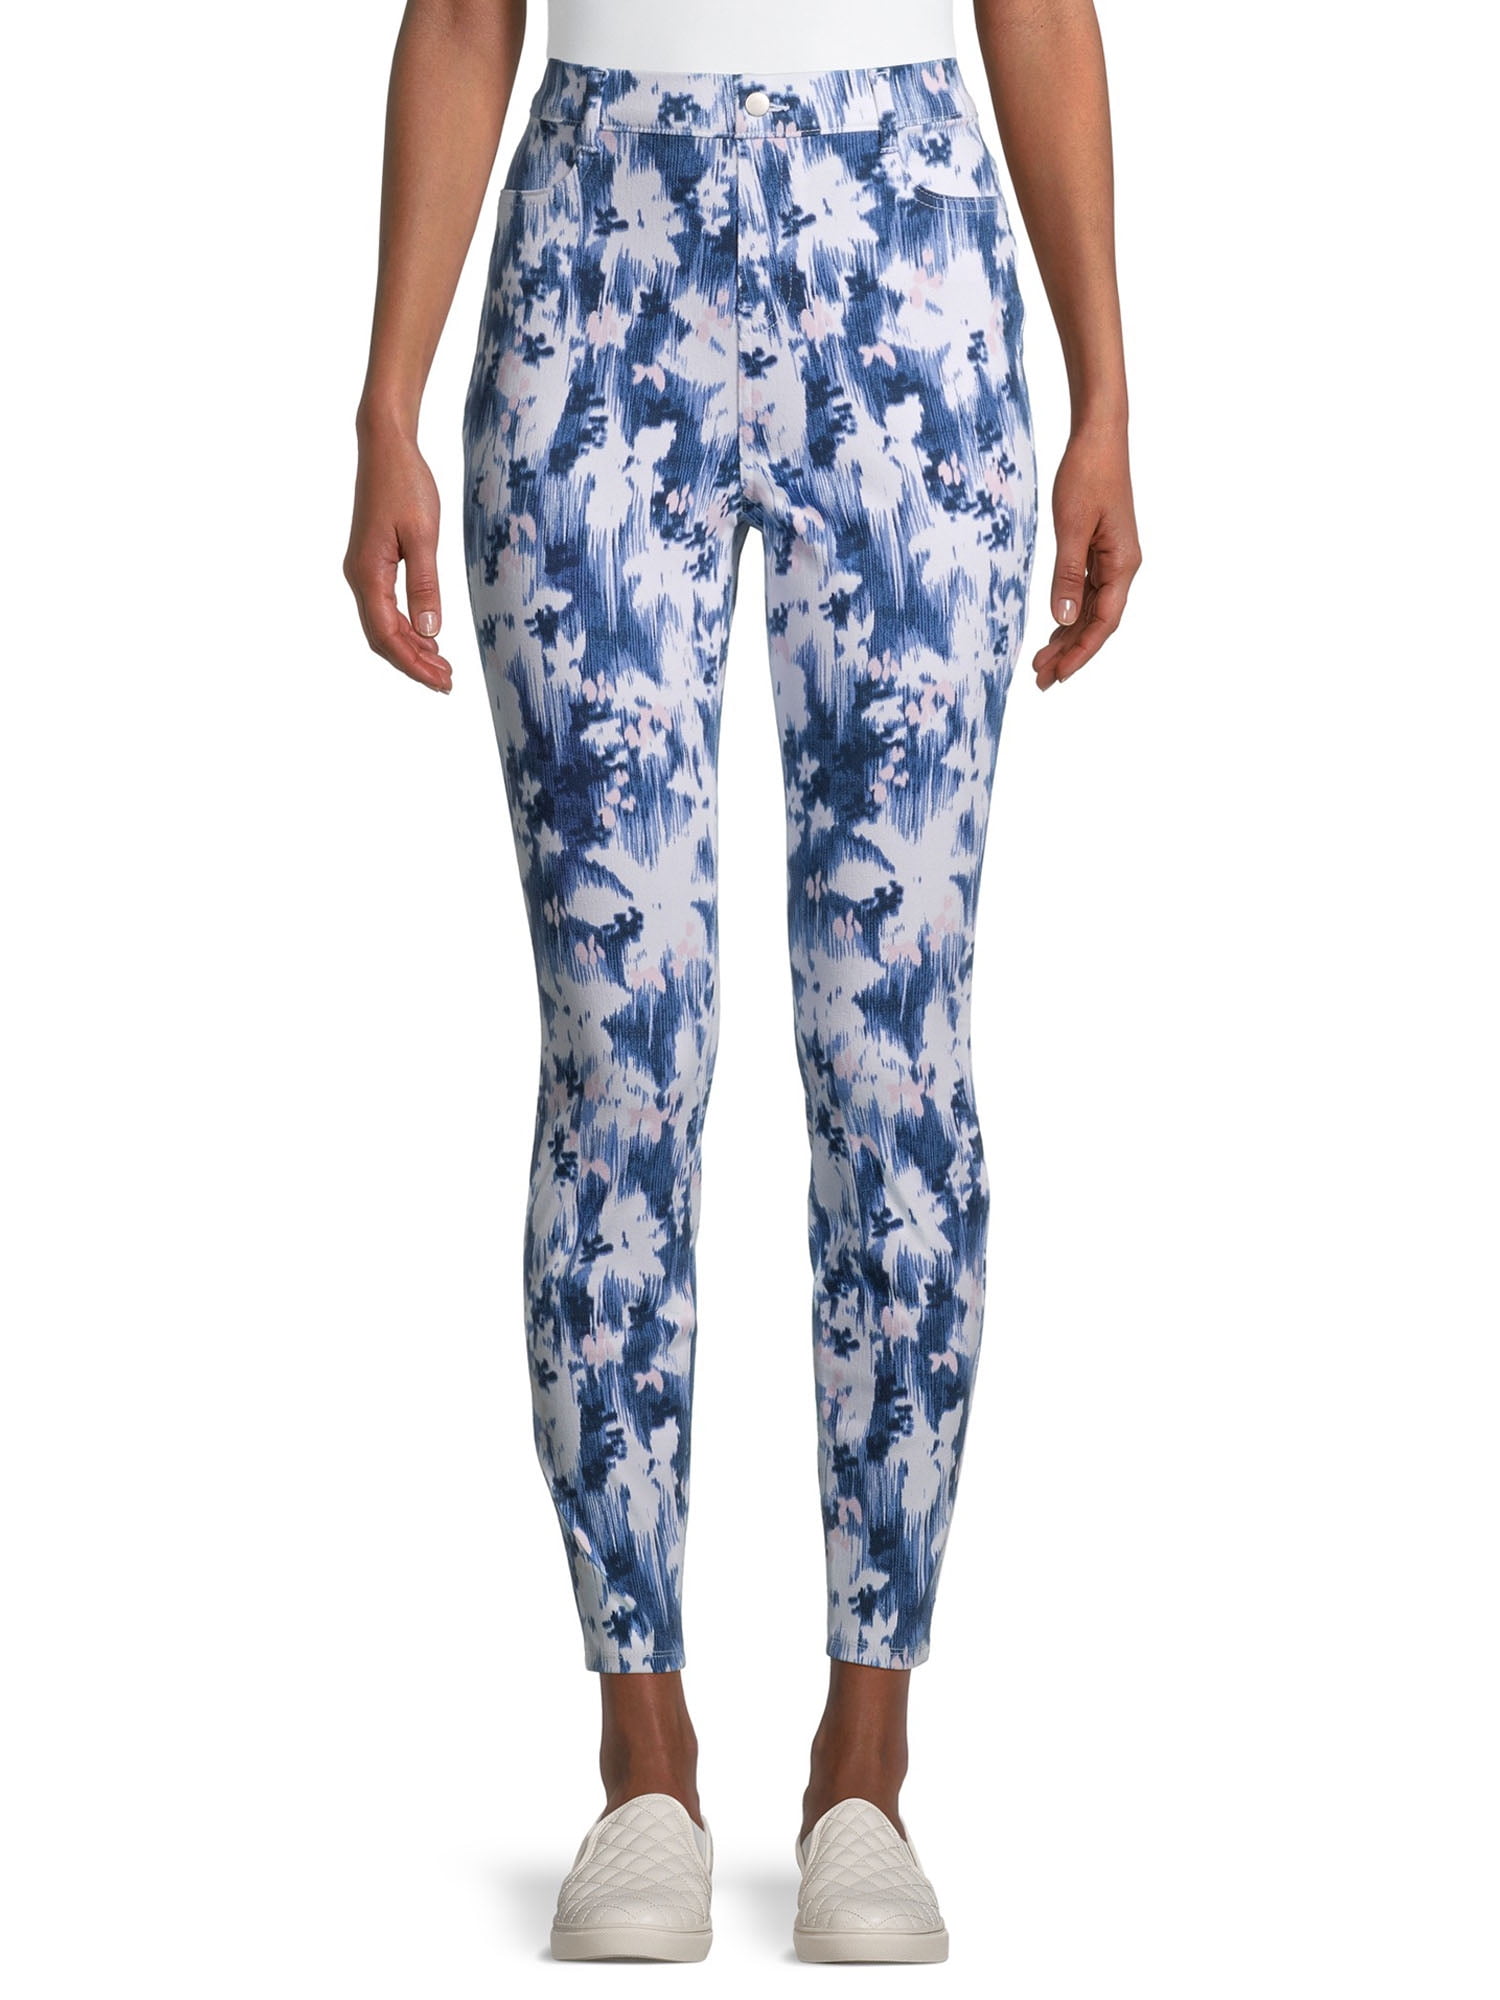 Womens Clothing Trousers Slacks and Chinos Leggings Blue Givenchy Synthetic Jacquard Elastic legging in Baby Blue & White 